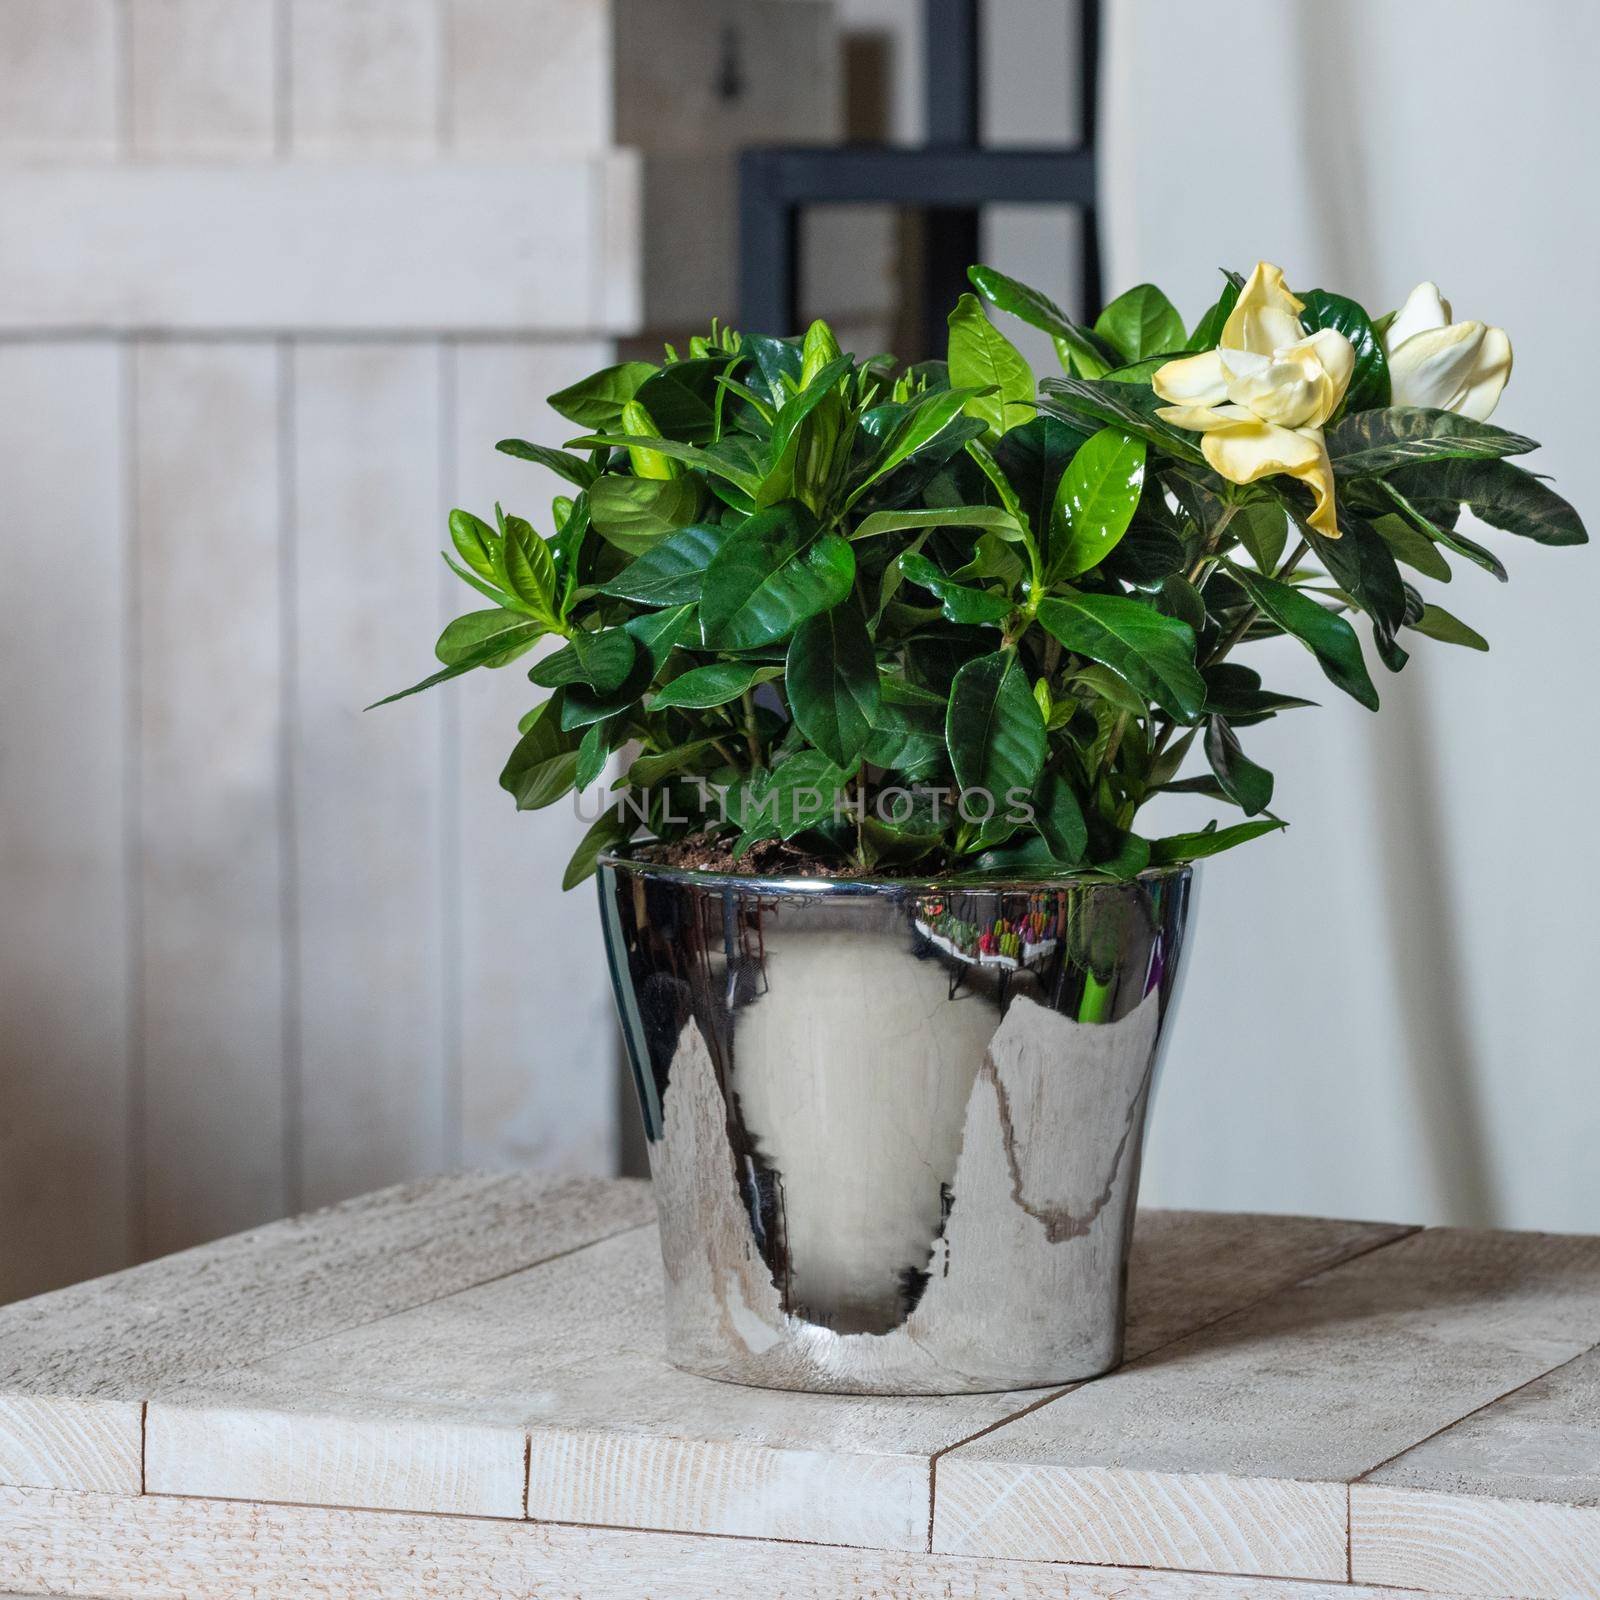 The beautiful Gardenia flower plant in the shiny pot by ferhad